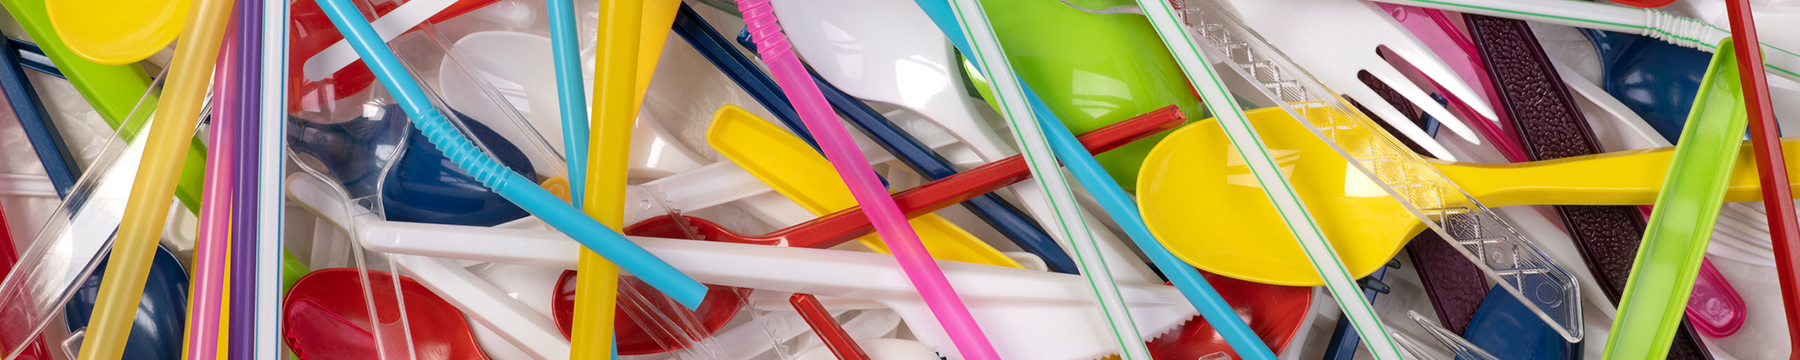 Disposable single use plastic objects such as bottles, cups, forks, spoons and drinking straws